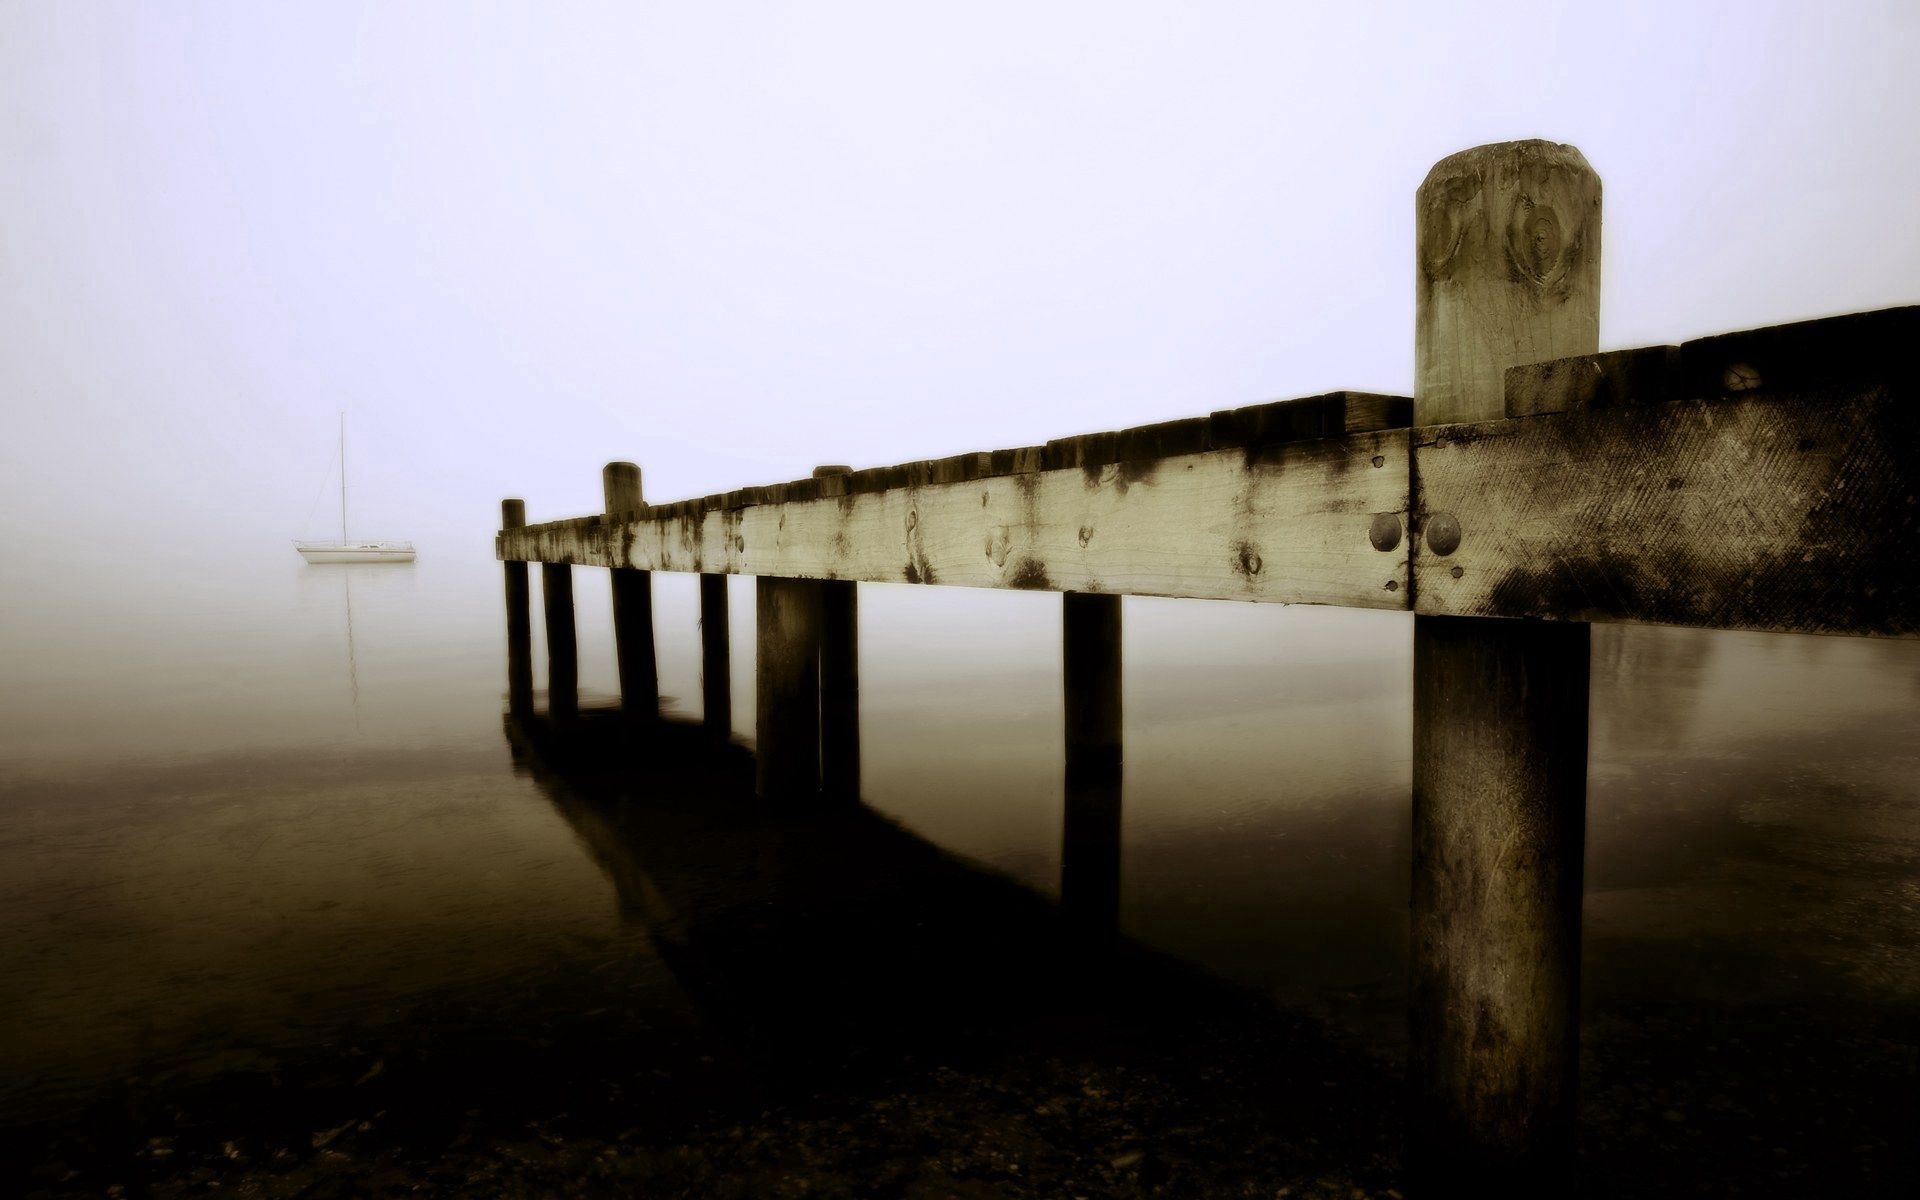 android nature, sea, pier, fog, boat, planks, board